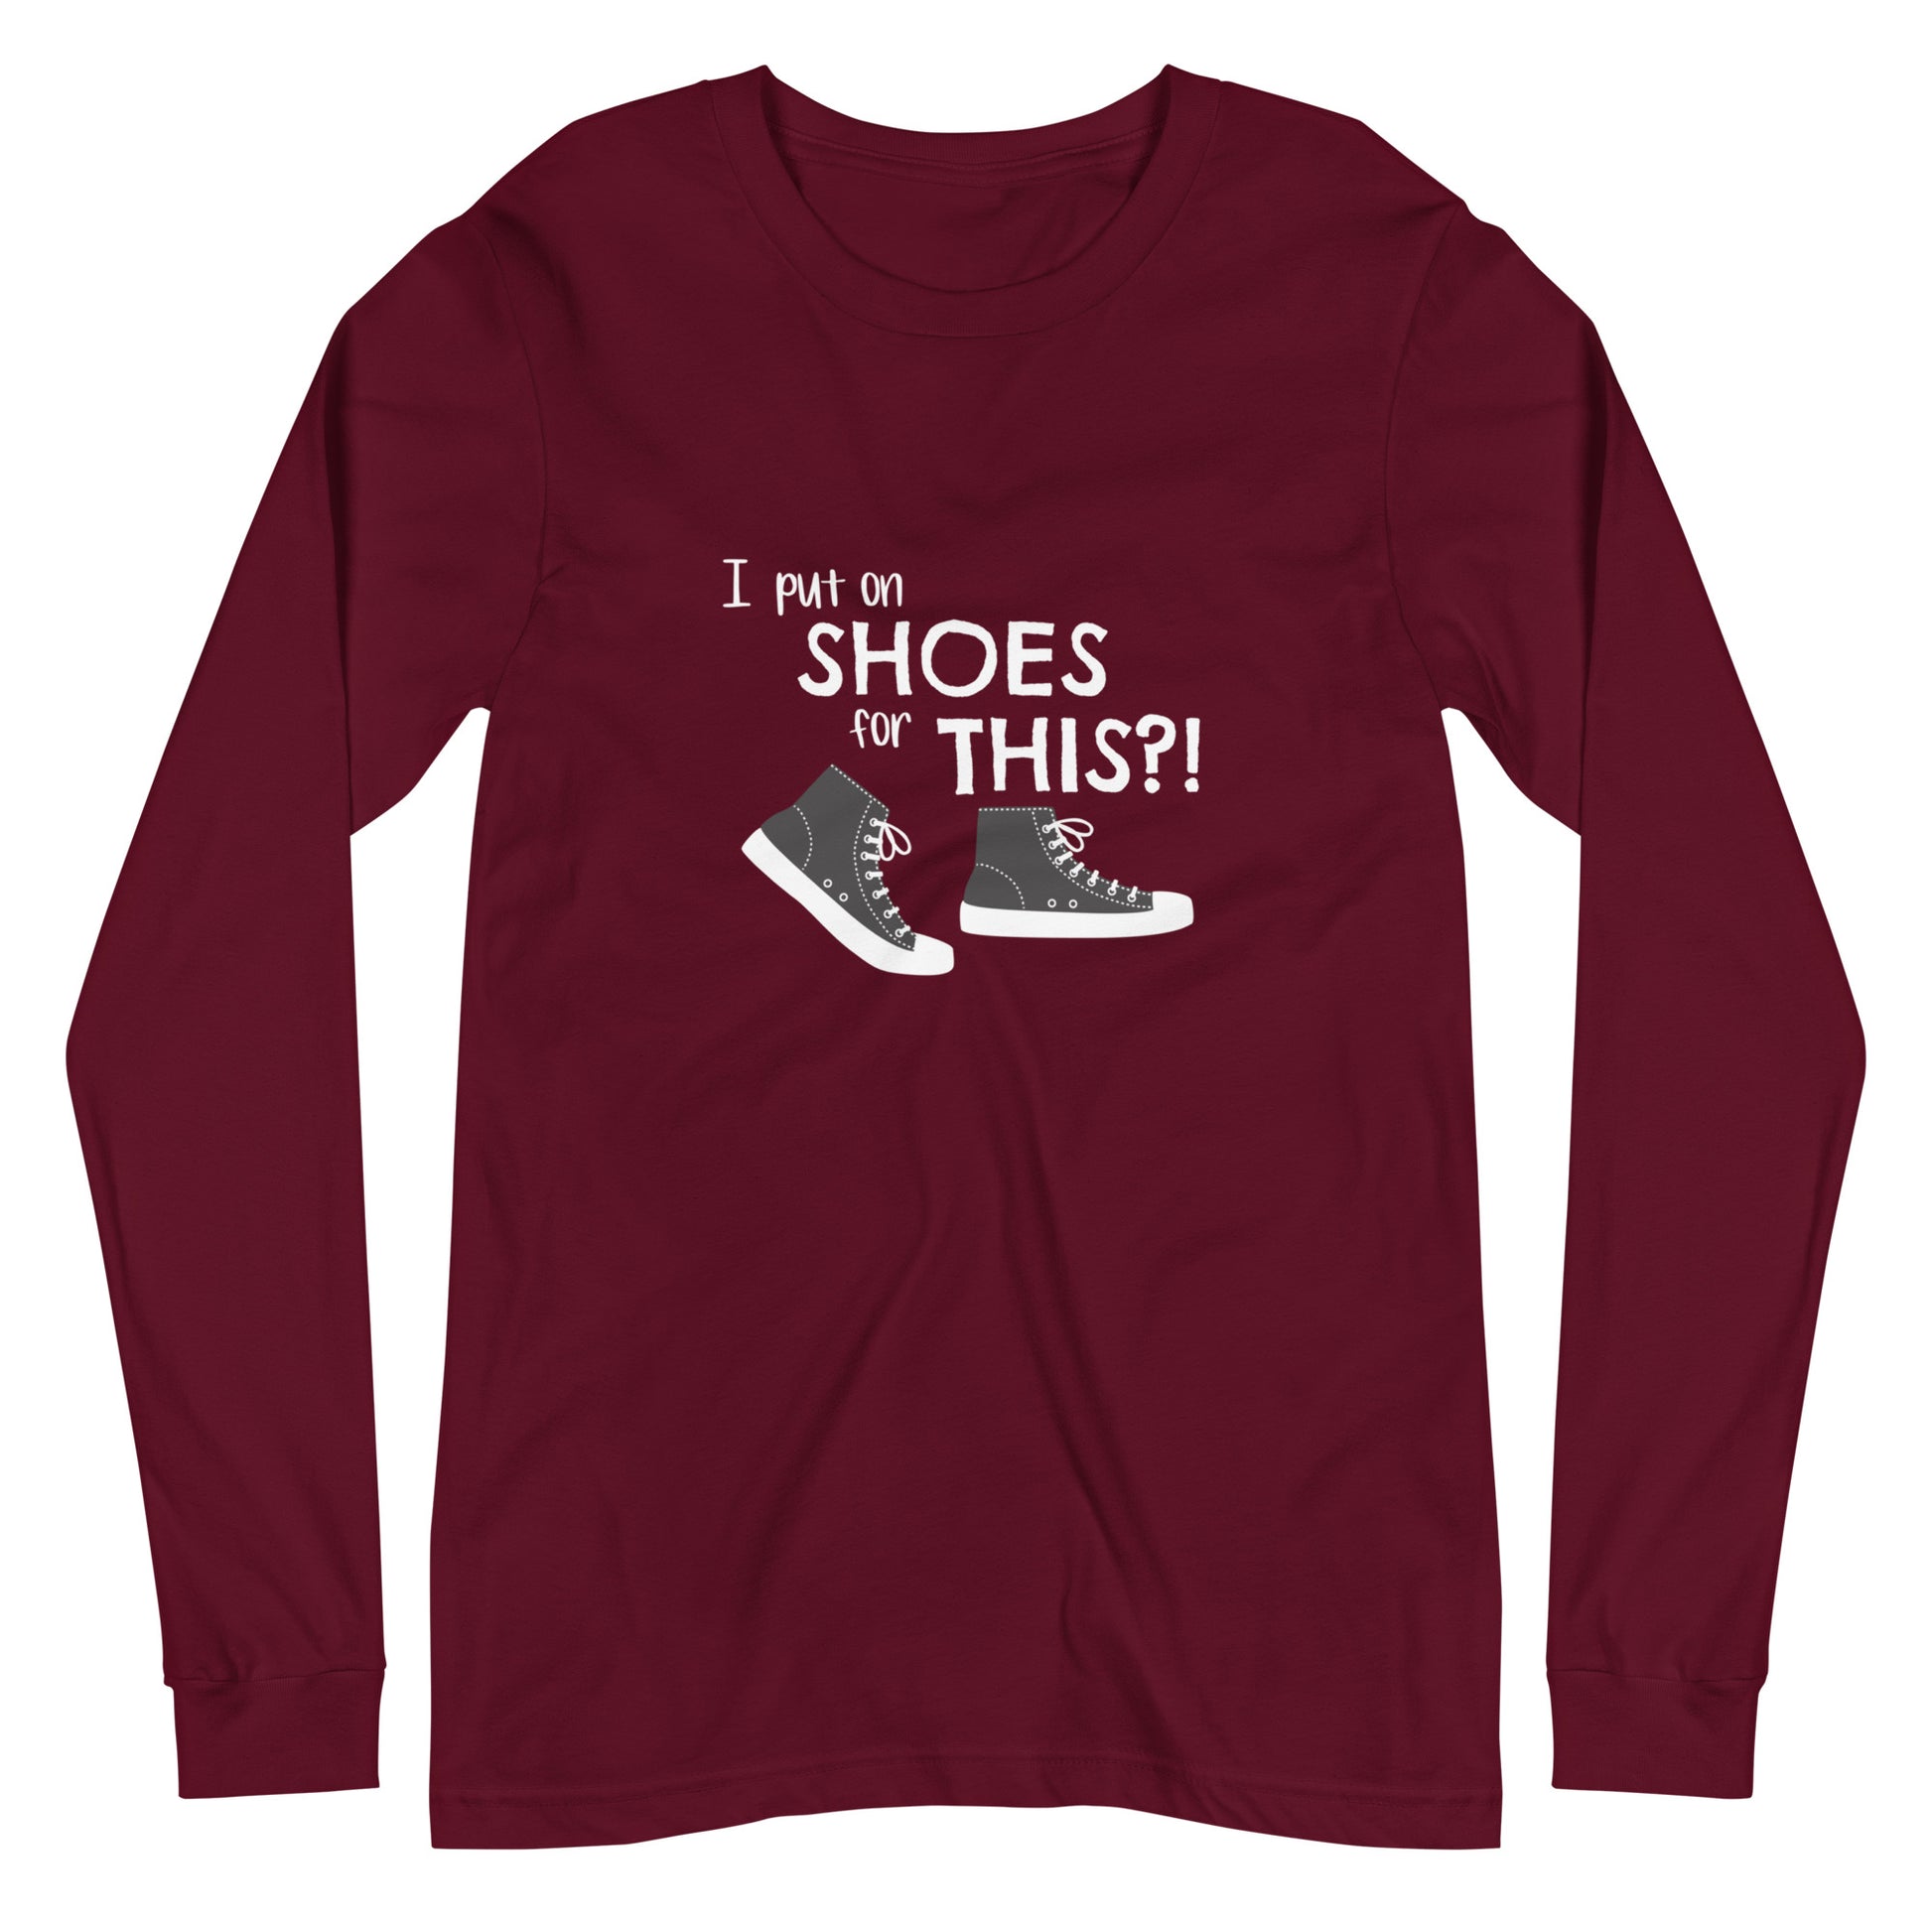 Maroon long-sleeve t-shirt with graphic of black and white canvas "chuck" sneakers and text: "I put on SHOES for THIS?!"